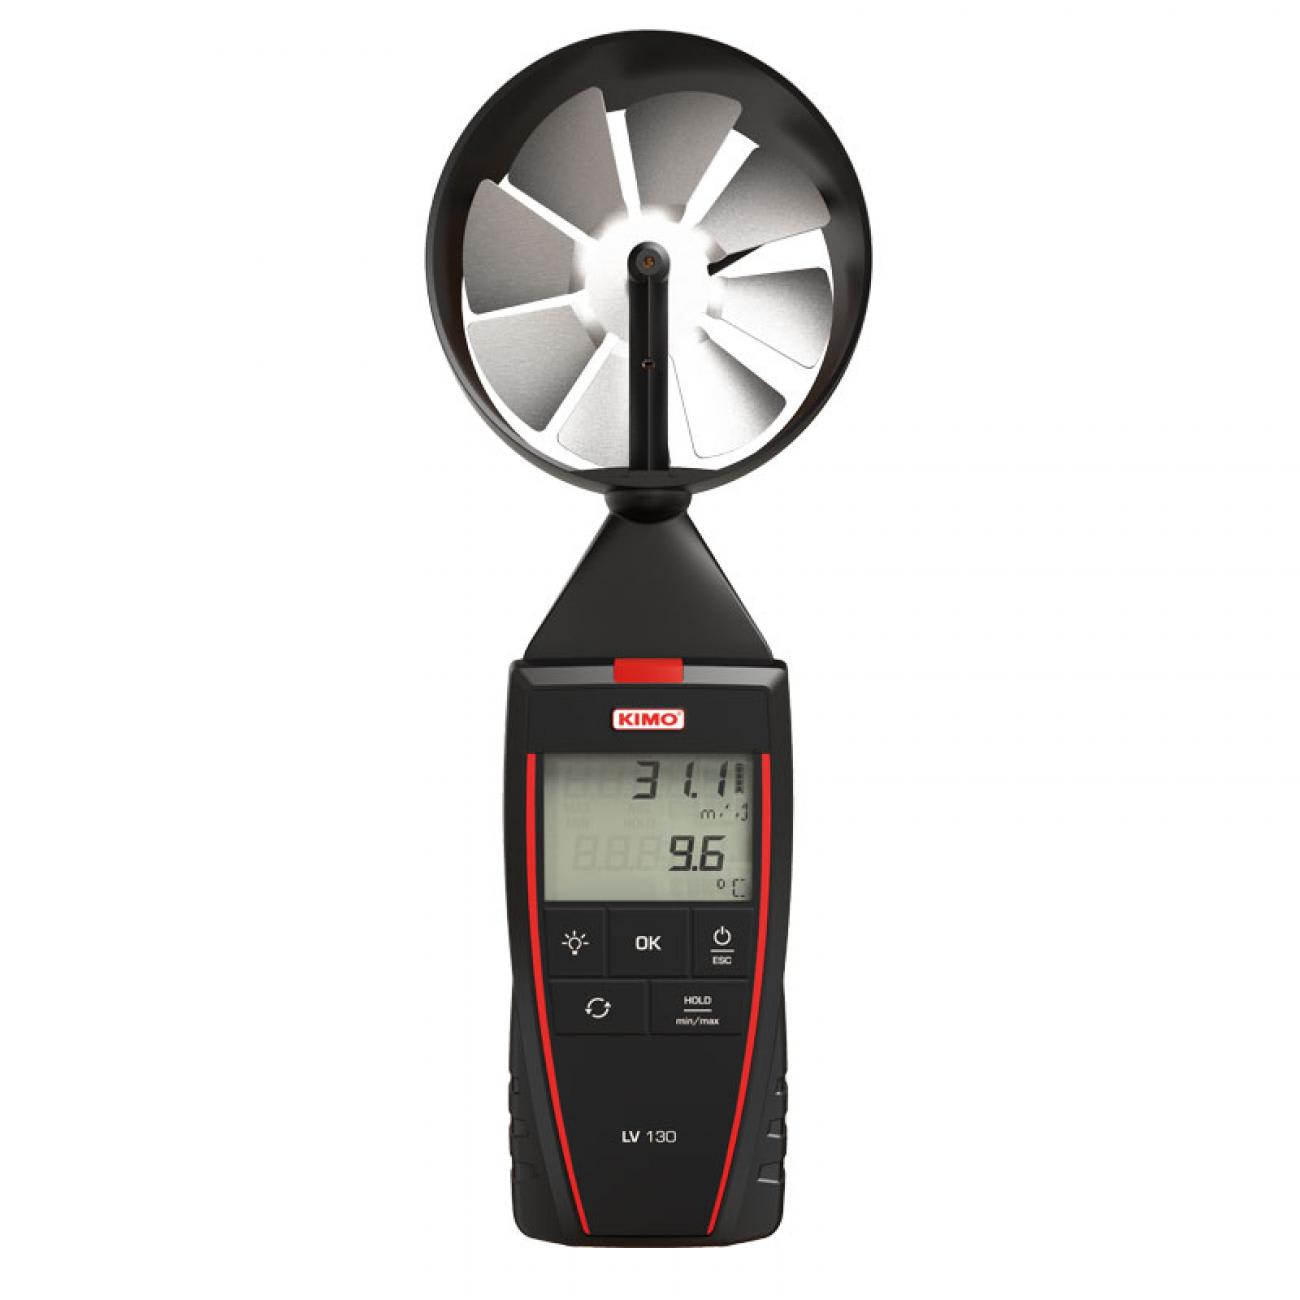 Sauermann Industrie - Thermo-Anemometre LV130S - 2014